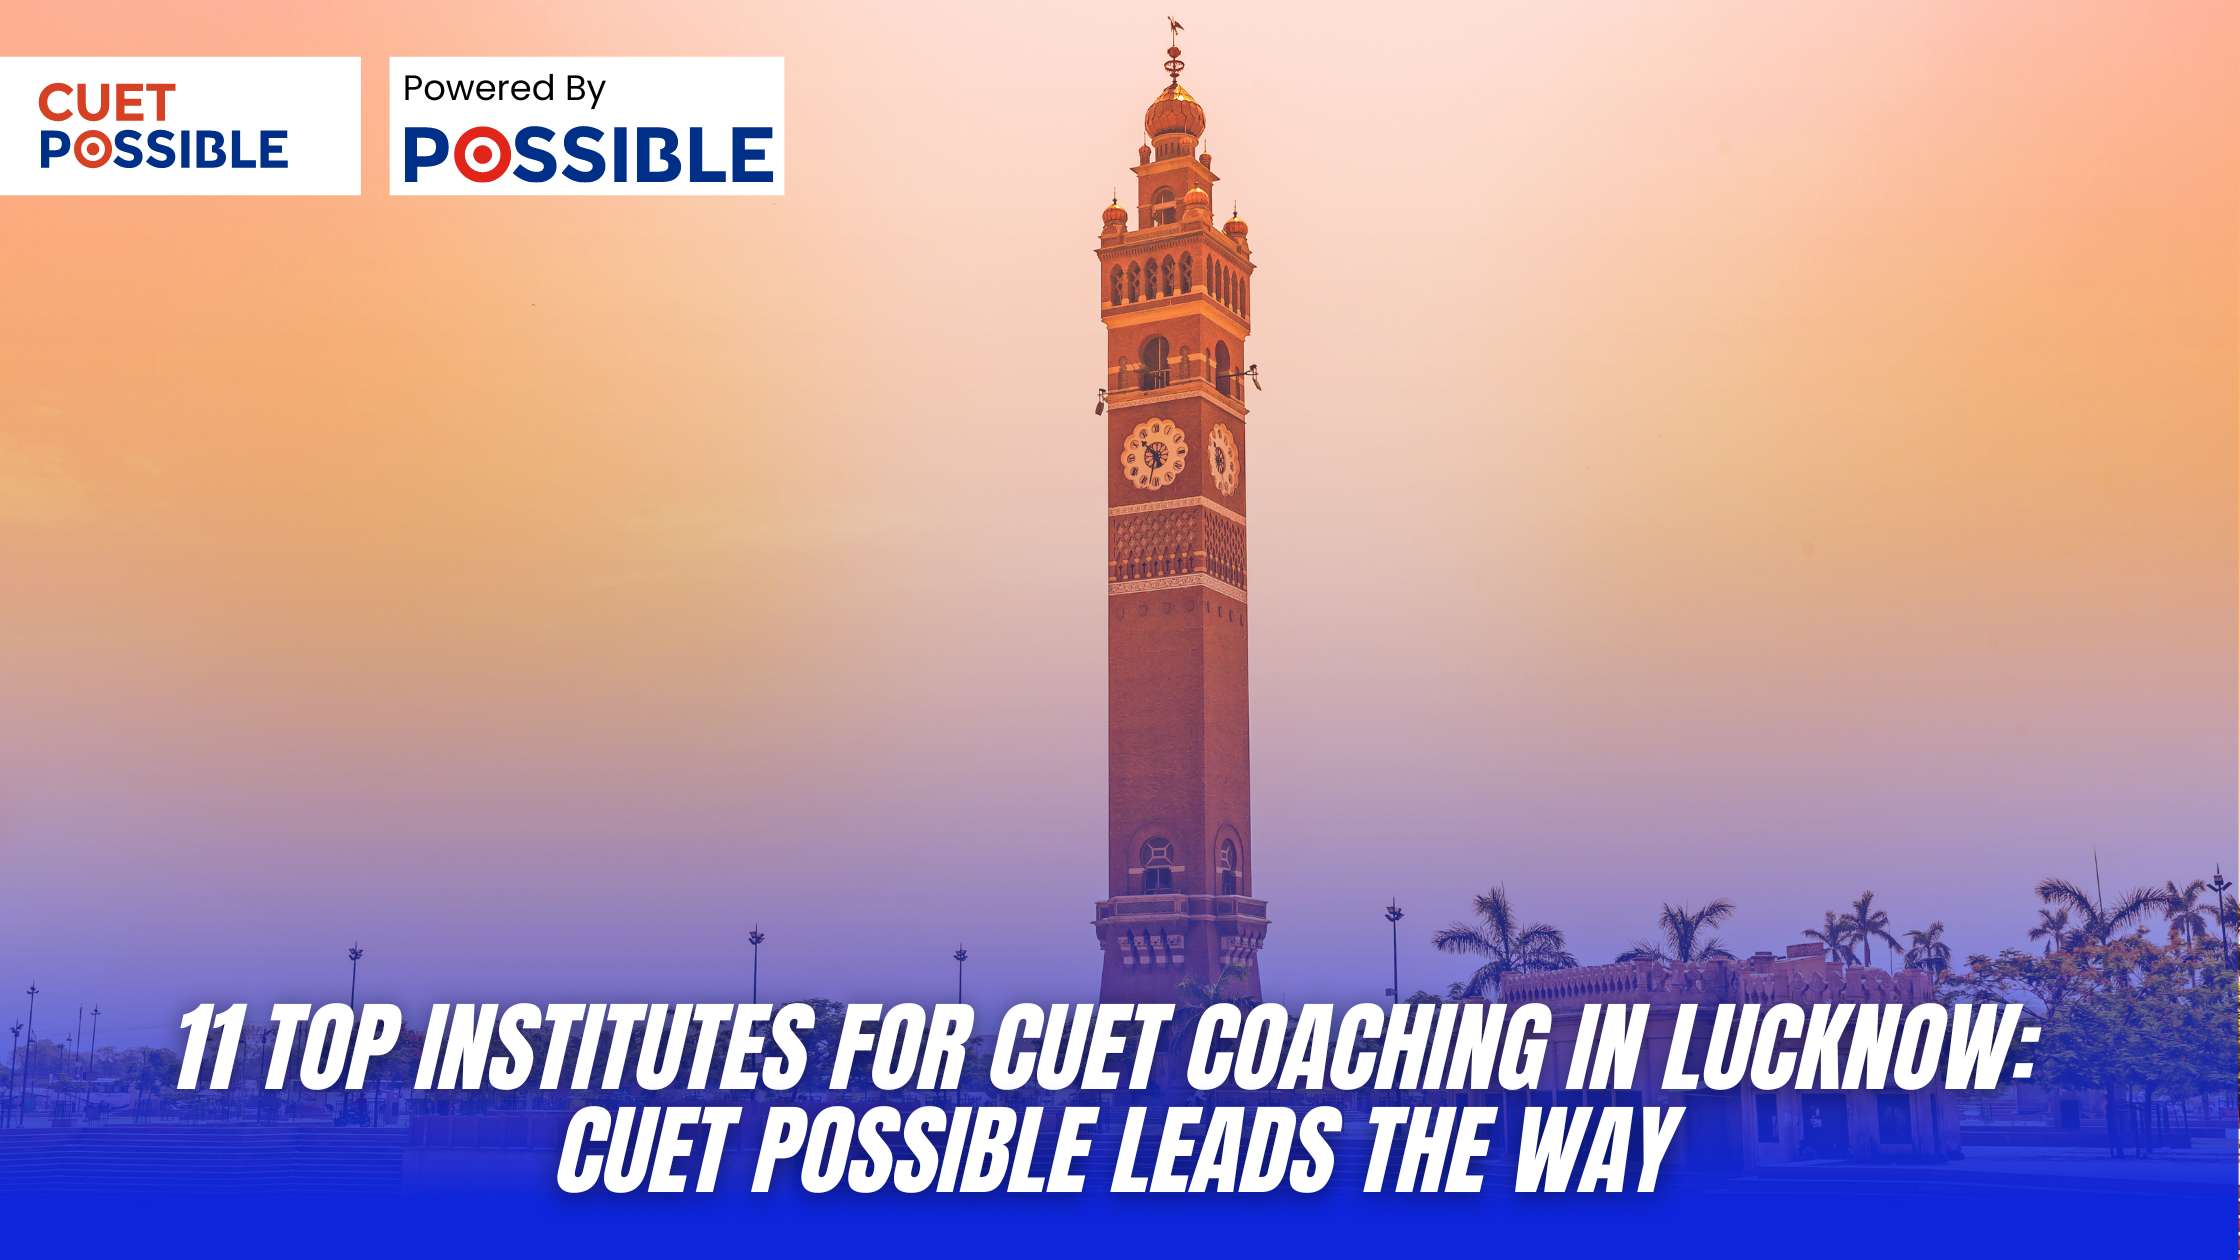 11 Top Institutes for CUET Coaching in Lucknow